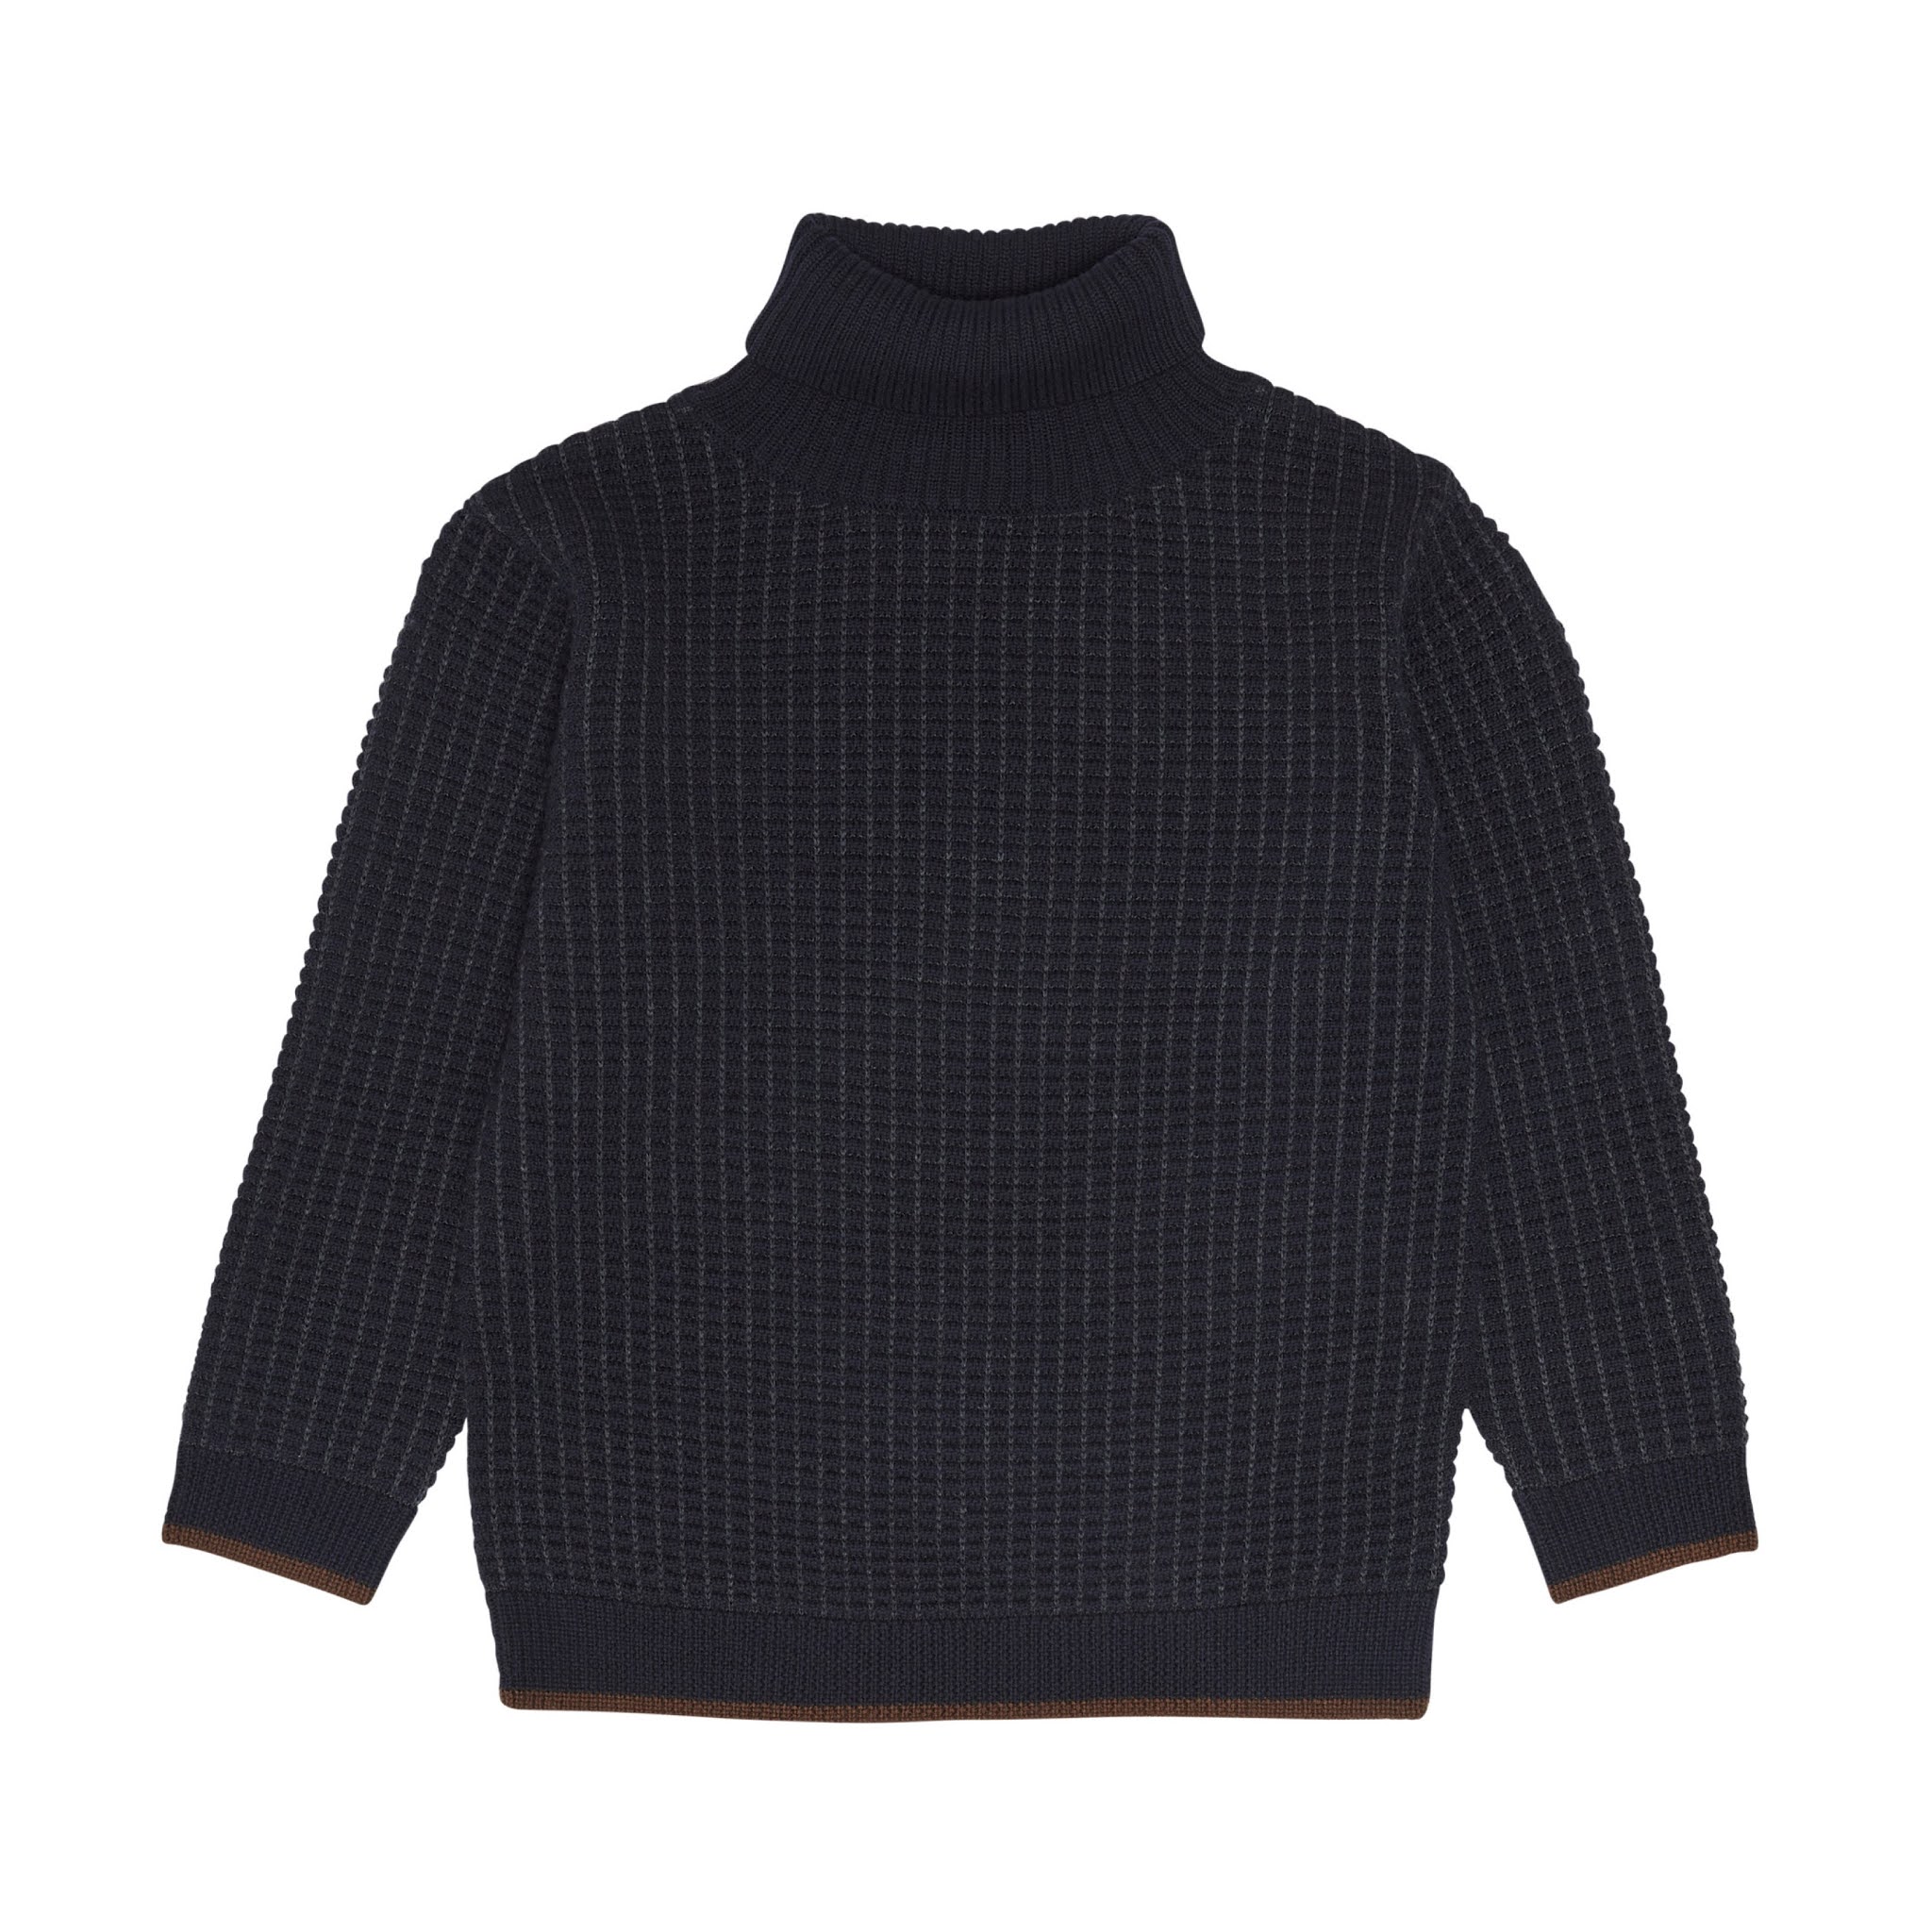 Boys Navy Turtleneck Sweater from Fub